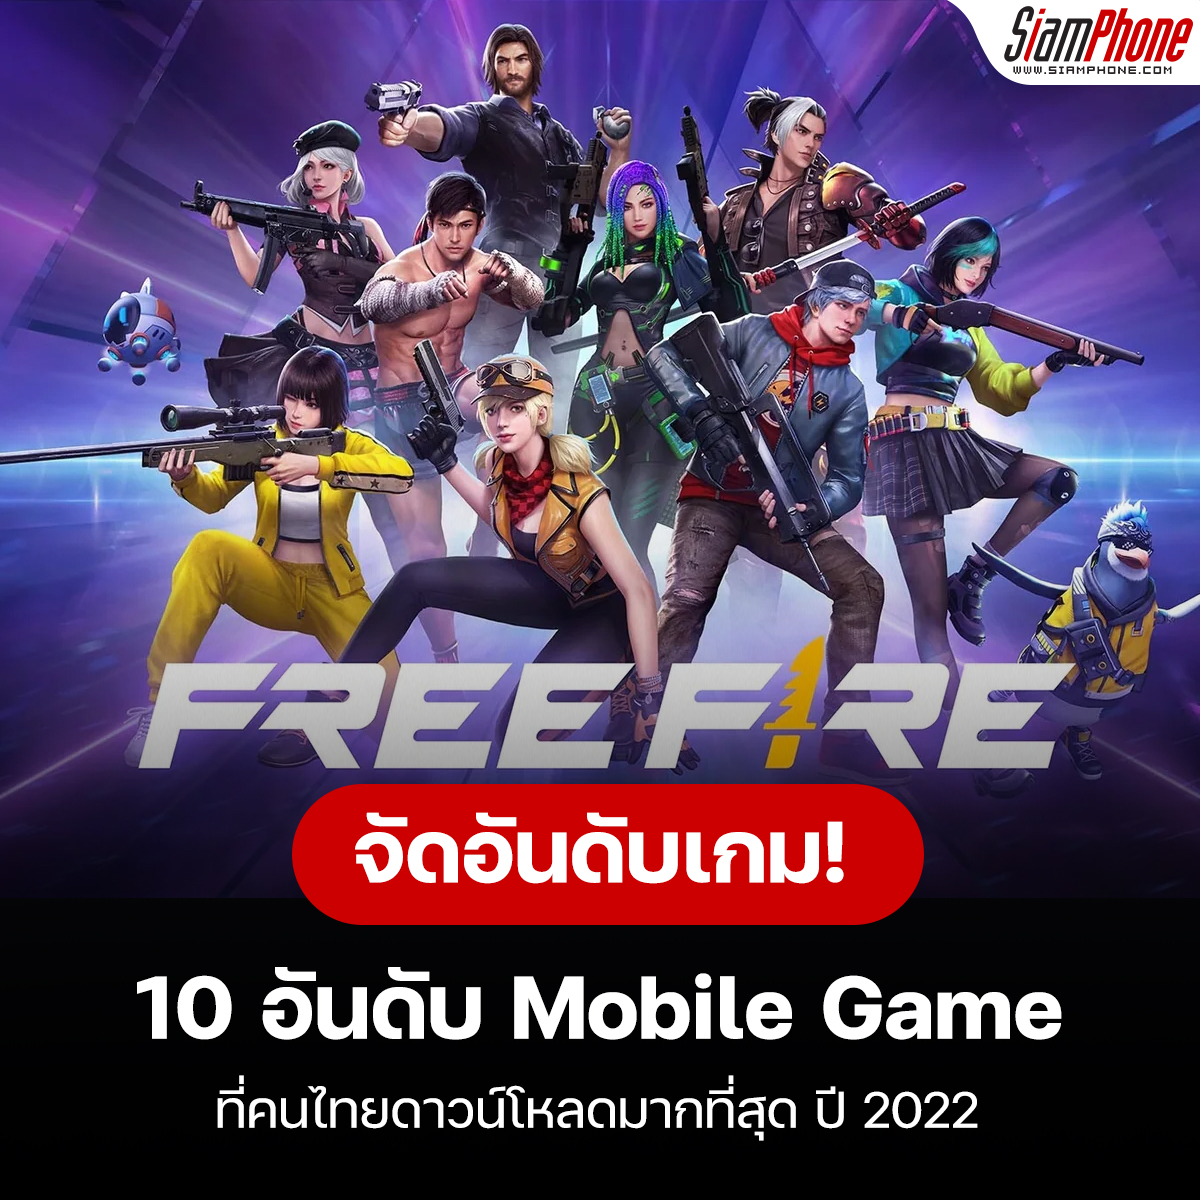 Top 10 Mobile Games that Thai people download the most in 2022